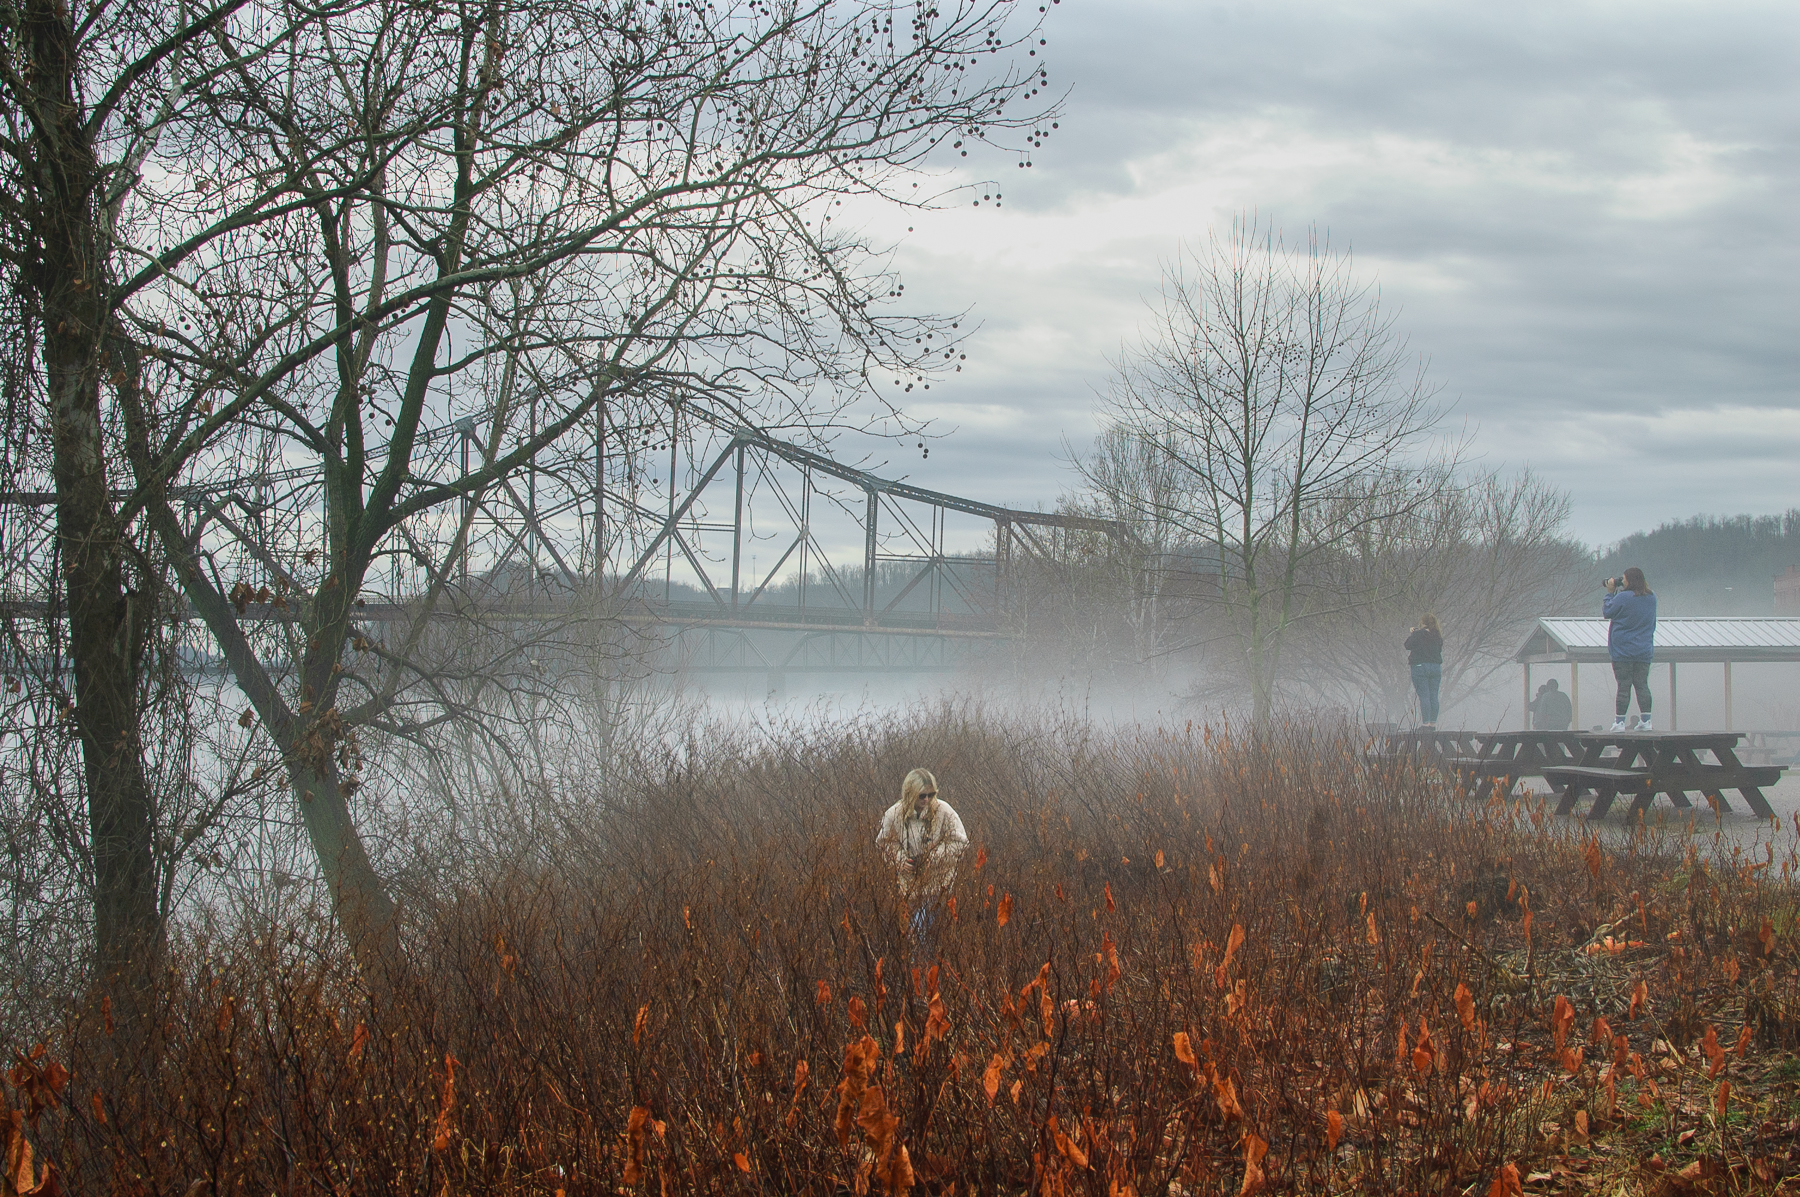 Students photograph area by a bridge along river in Ohio Valley with early morning mist